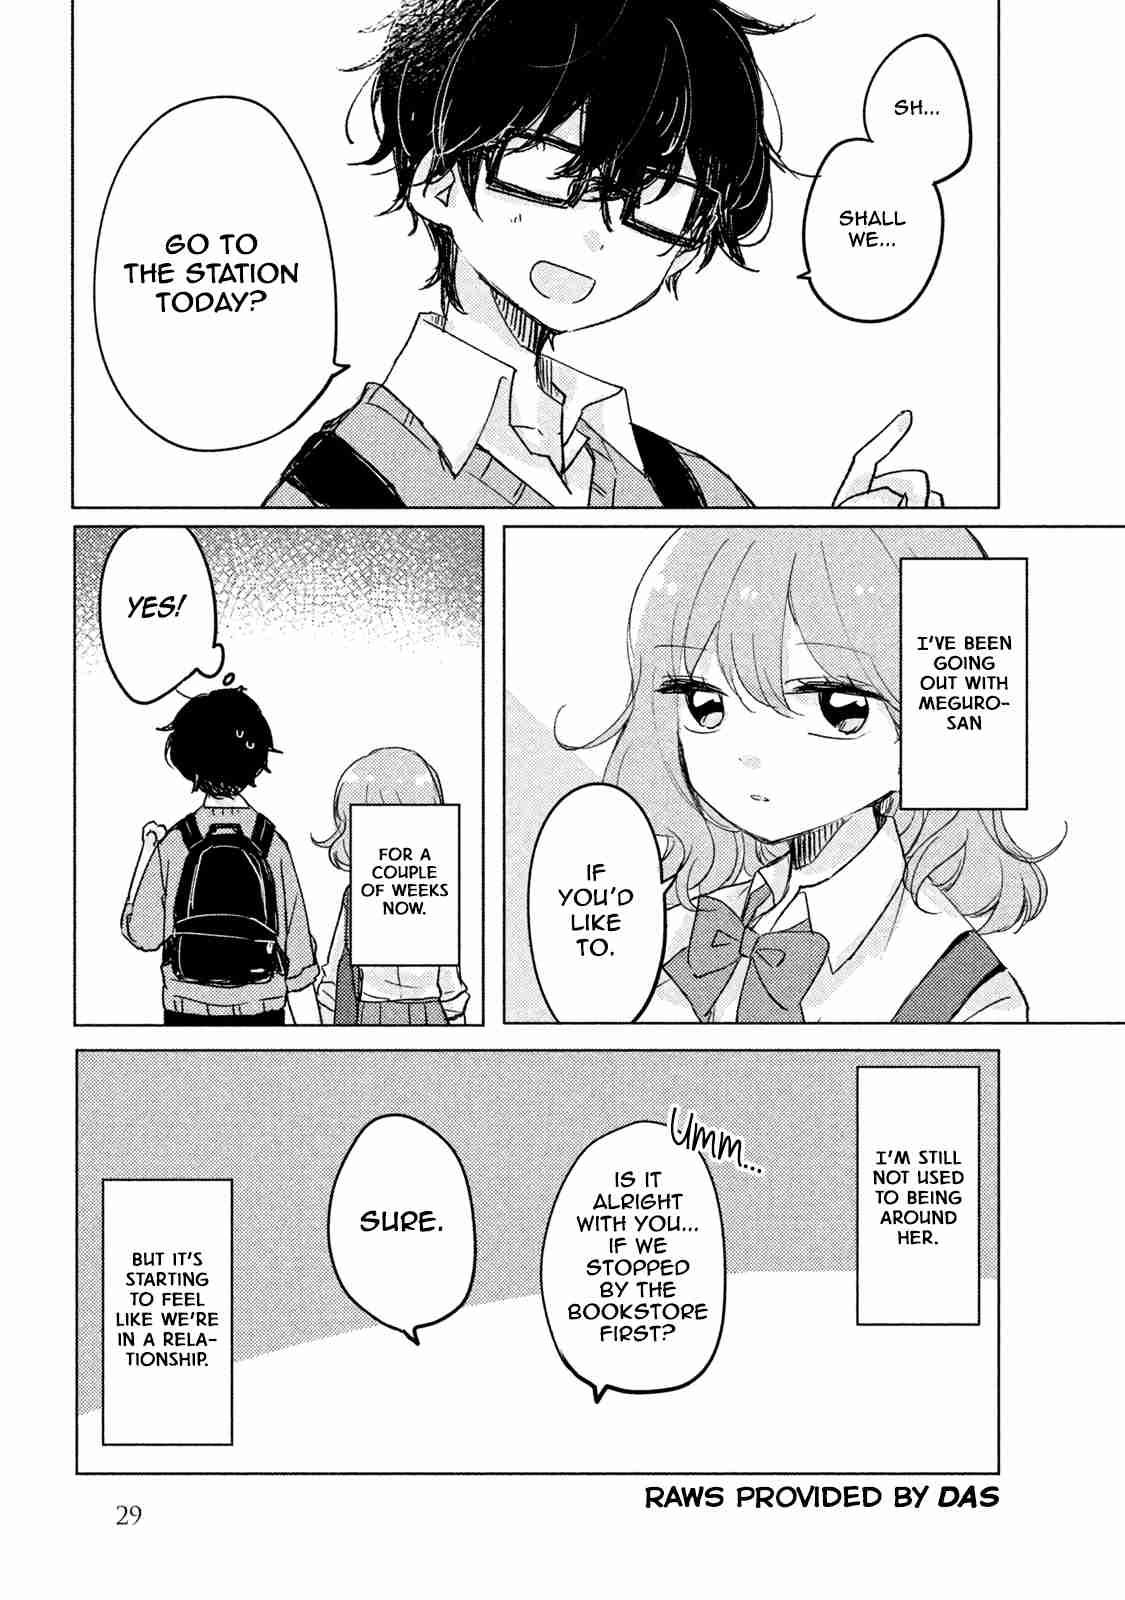 It's Not Meguro san's First Time Vol. 1 Ch. 3